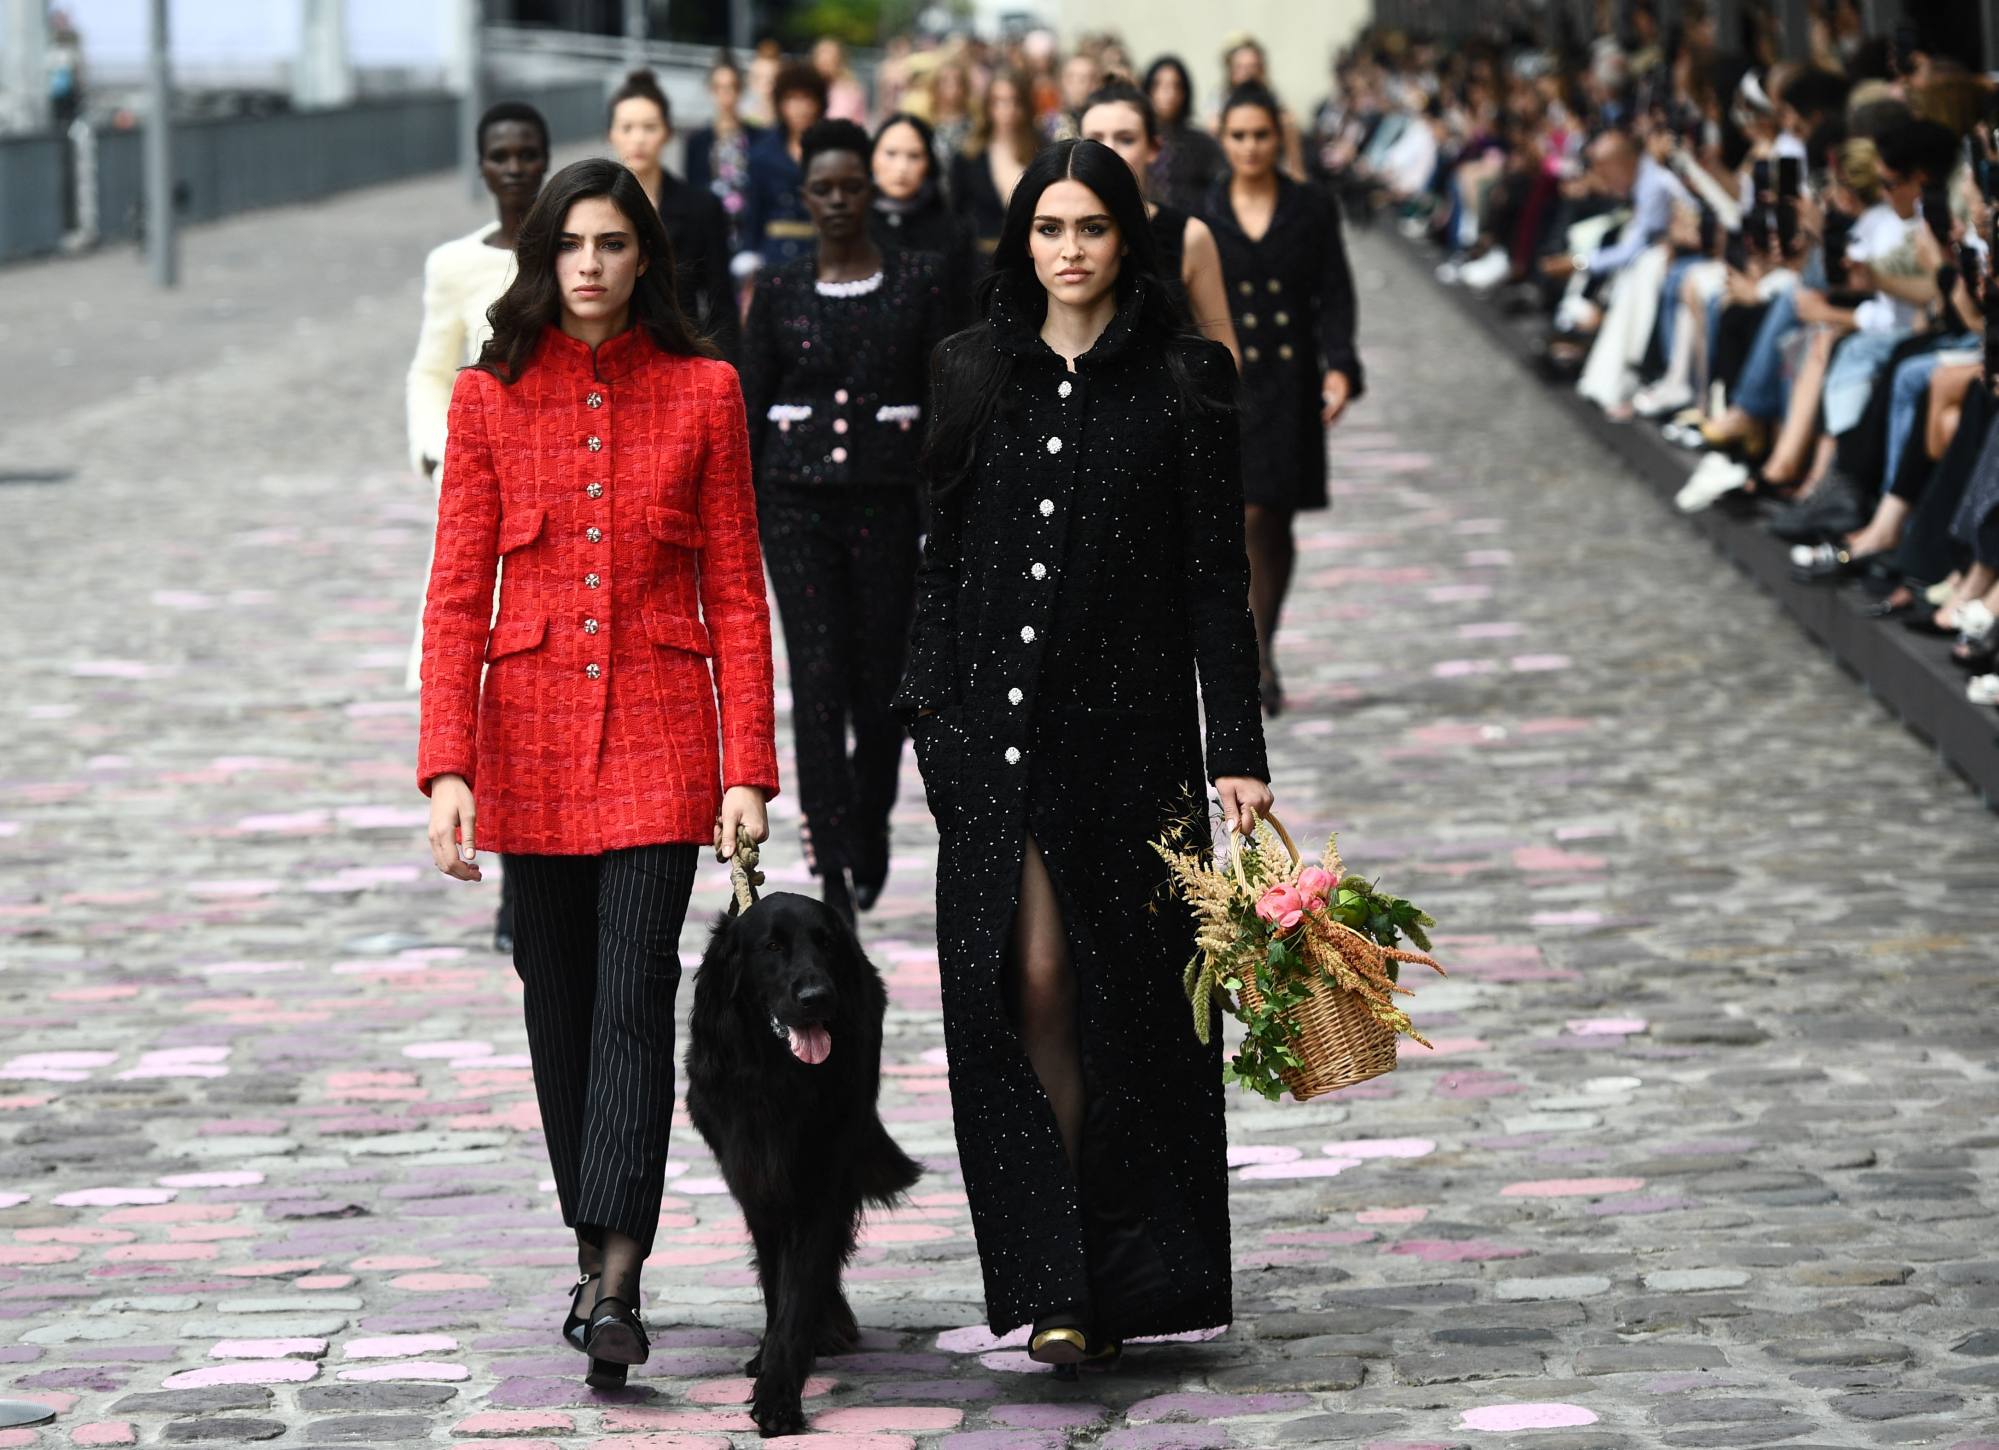 Balenciaga's Demna on cancel culture and self-therapy: the Kering